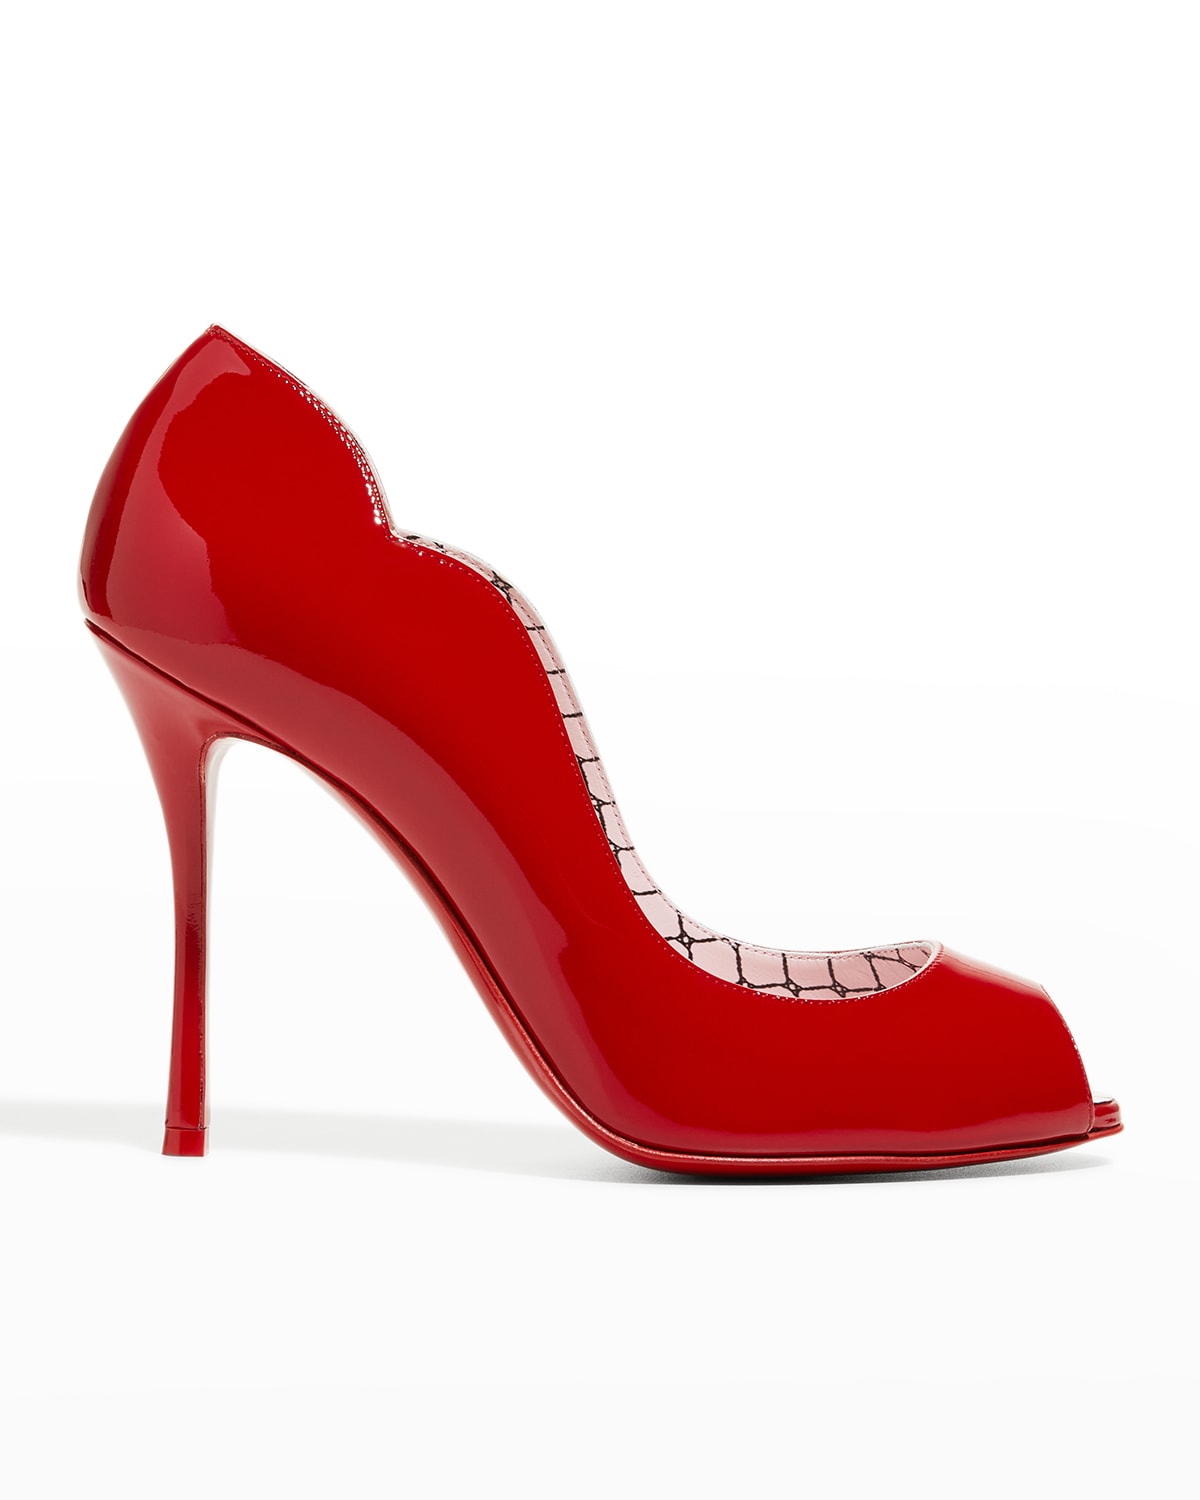 Christian Louboutin Chick Up Red Sole Pumps